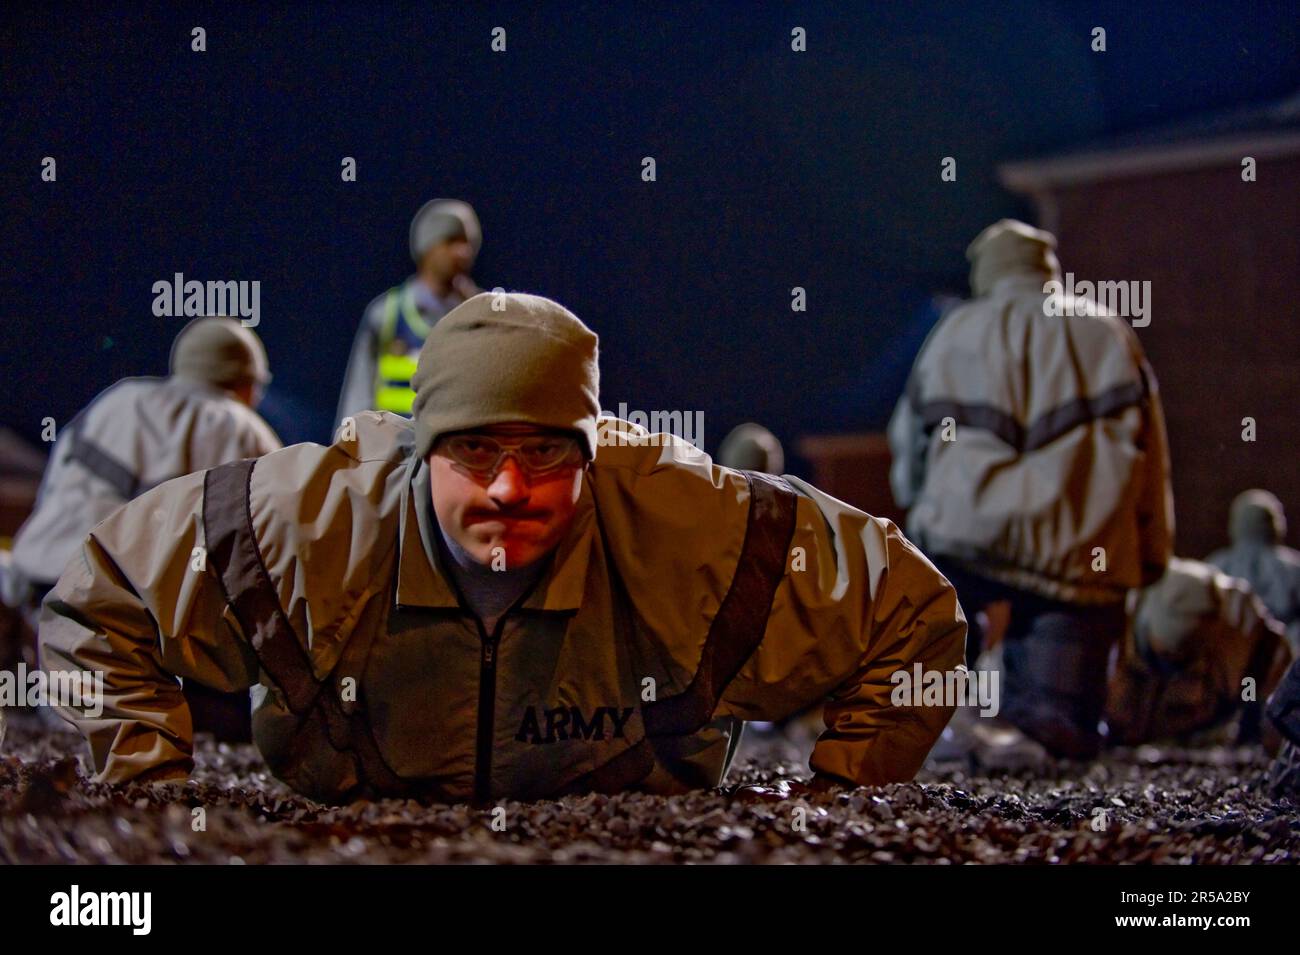 A soldier in basic training does push-ups during the physical training formation. Stock Photo